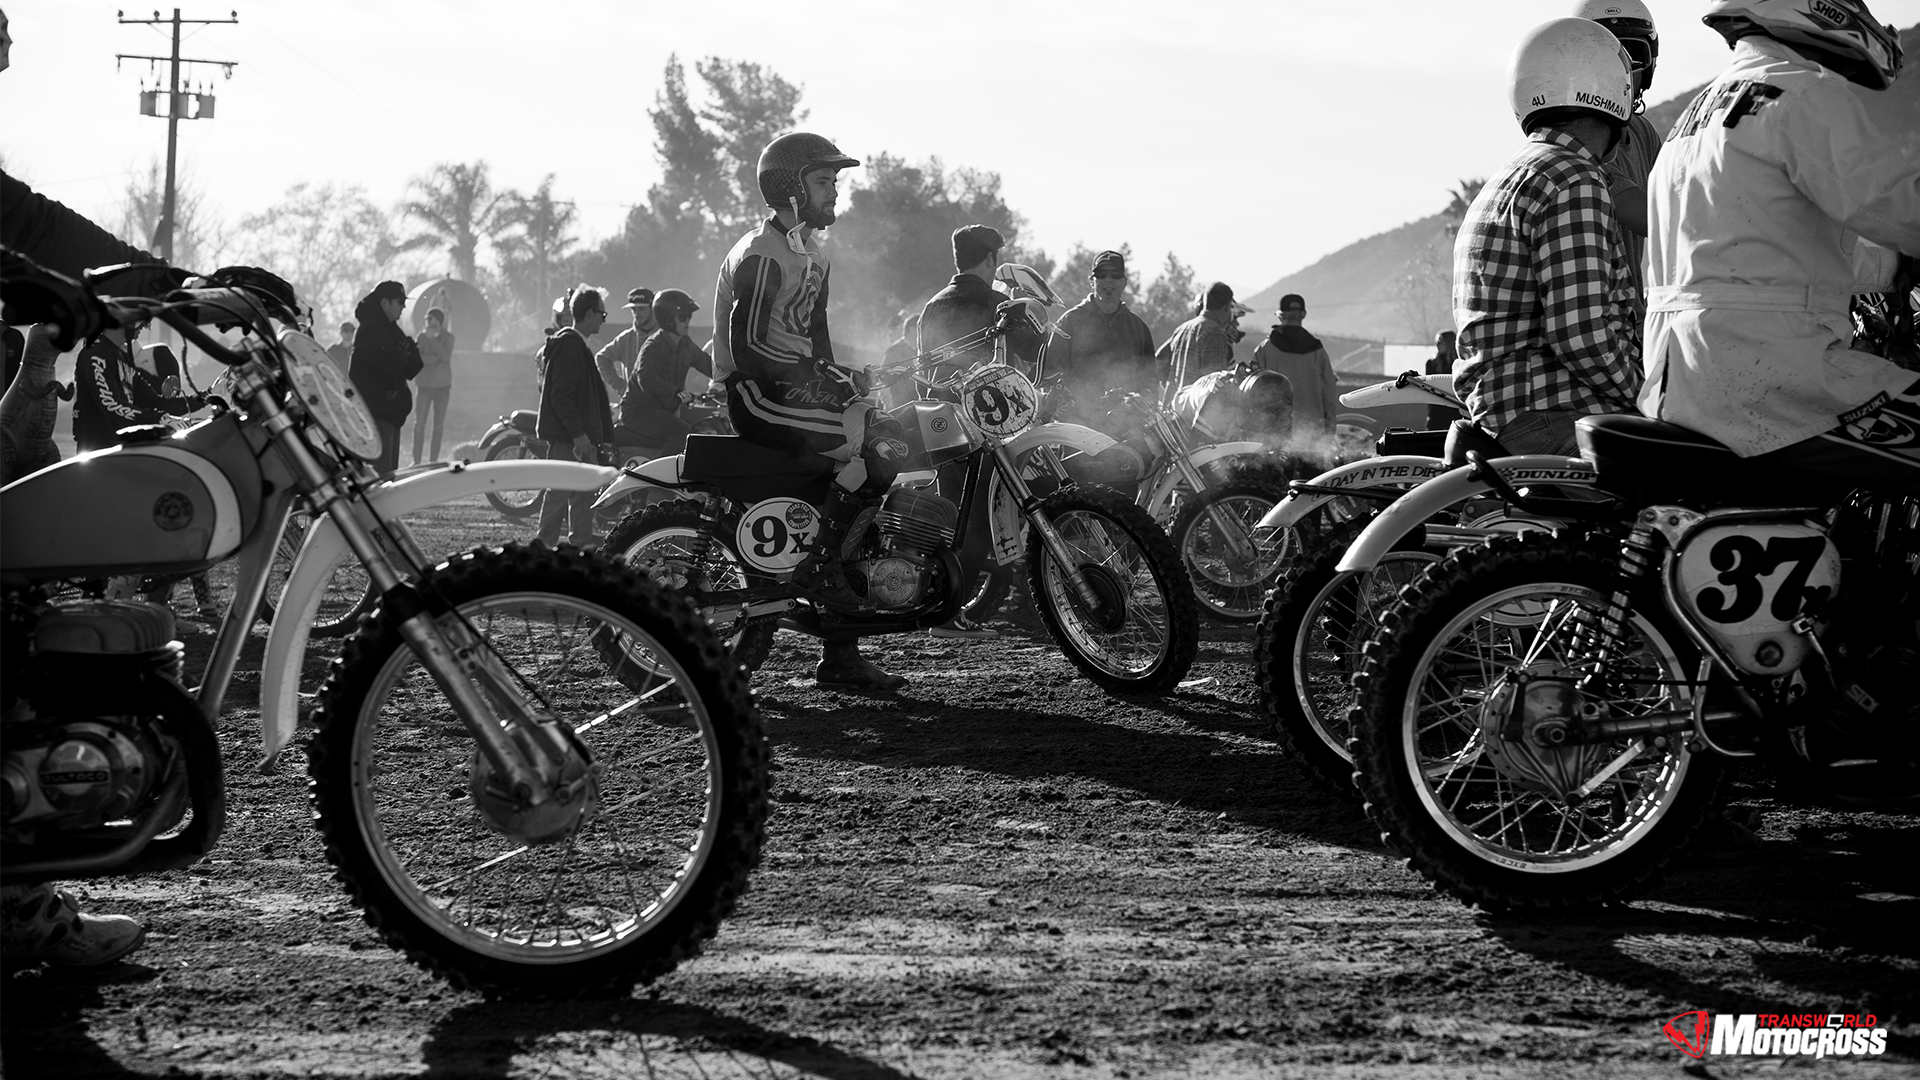 Red Bull Day In The Dirt 19. Wednesday Wallpaper. Transworld